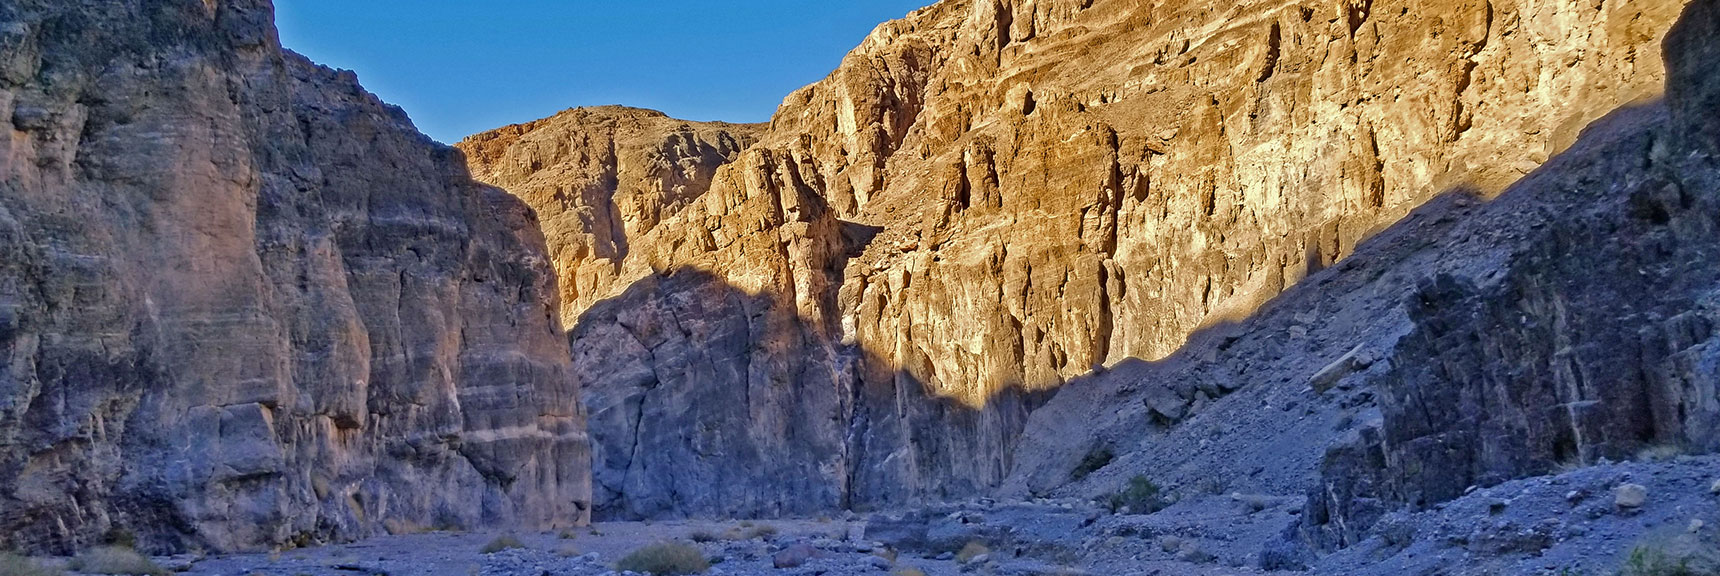 Lower Fall Canyon Alternately Widens and Narrows | Fall Canyon | Death Valley National Park, California